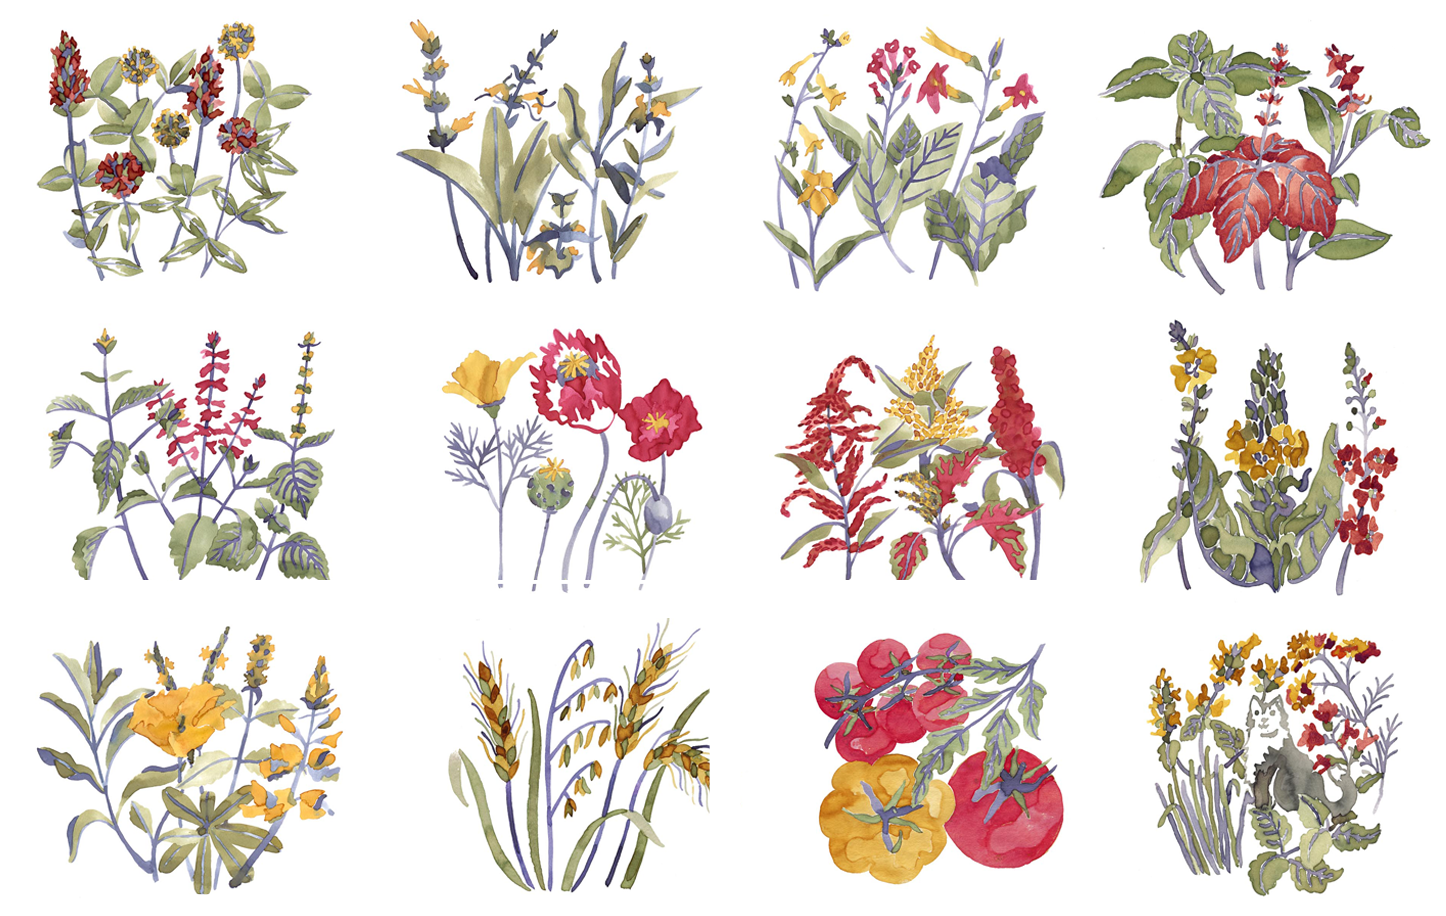 A grid with twelve watercolor paintings of plants by Goda Trakumaite. Most depict flowers, with wheat and tomatoes included on the bottom row.